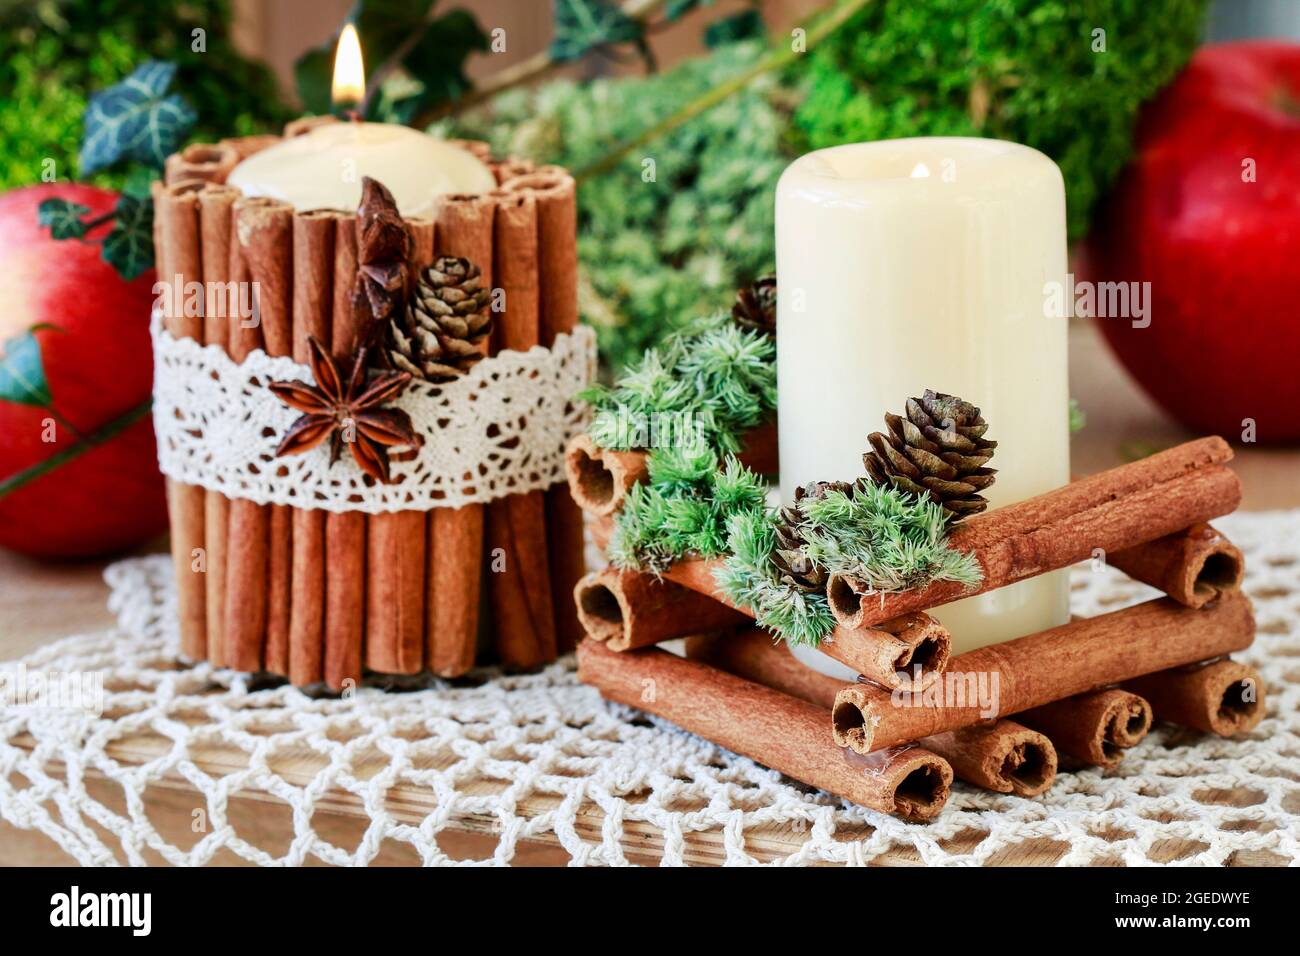 Candle decorated with cinnamon sticks. Christmas table decoration Stock  Photo - Alamy